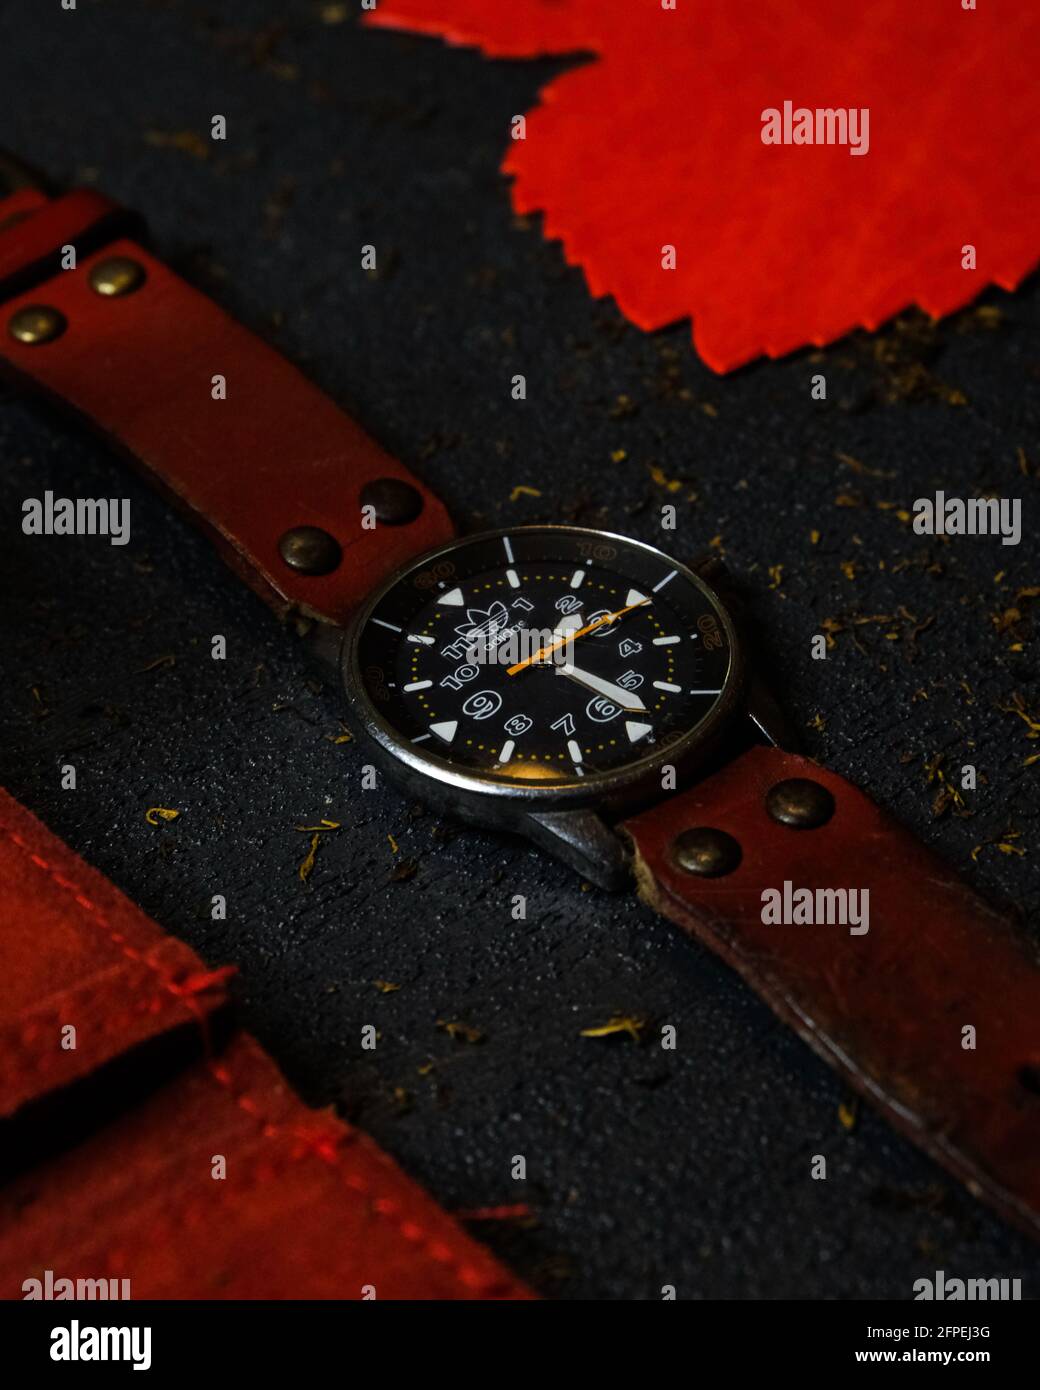 Antalya,Turkey - 15 May 2021: Adidas Originals vintage watch(10-0053B) with  a red strap on black background with surroundings Stock Photo - Alamy